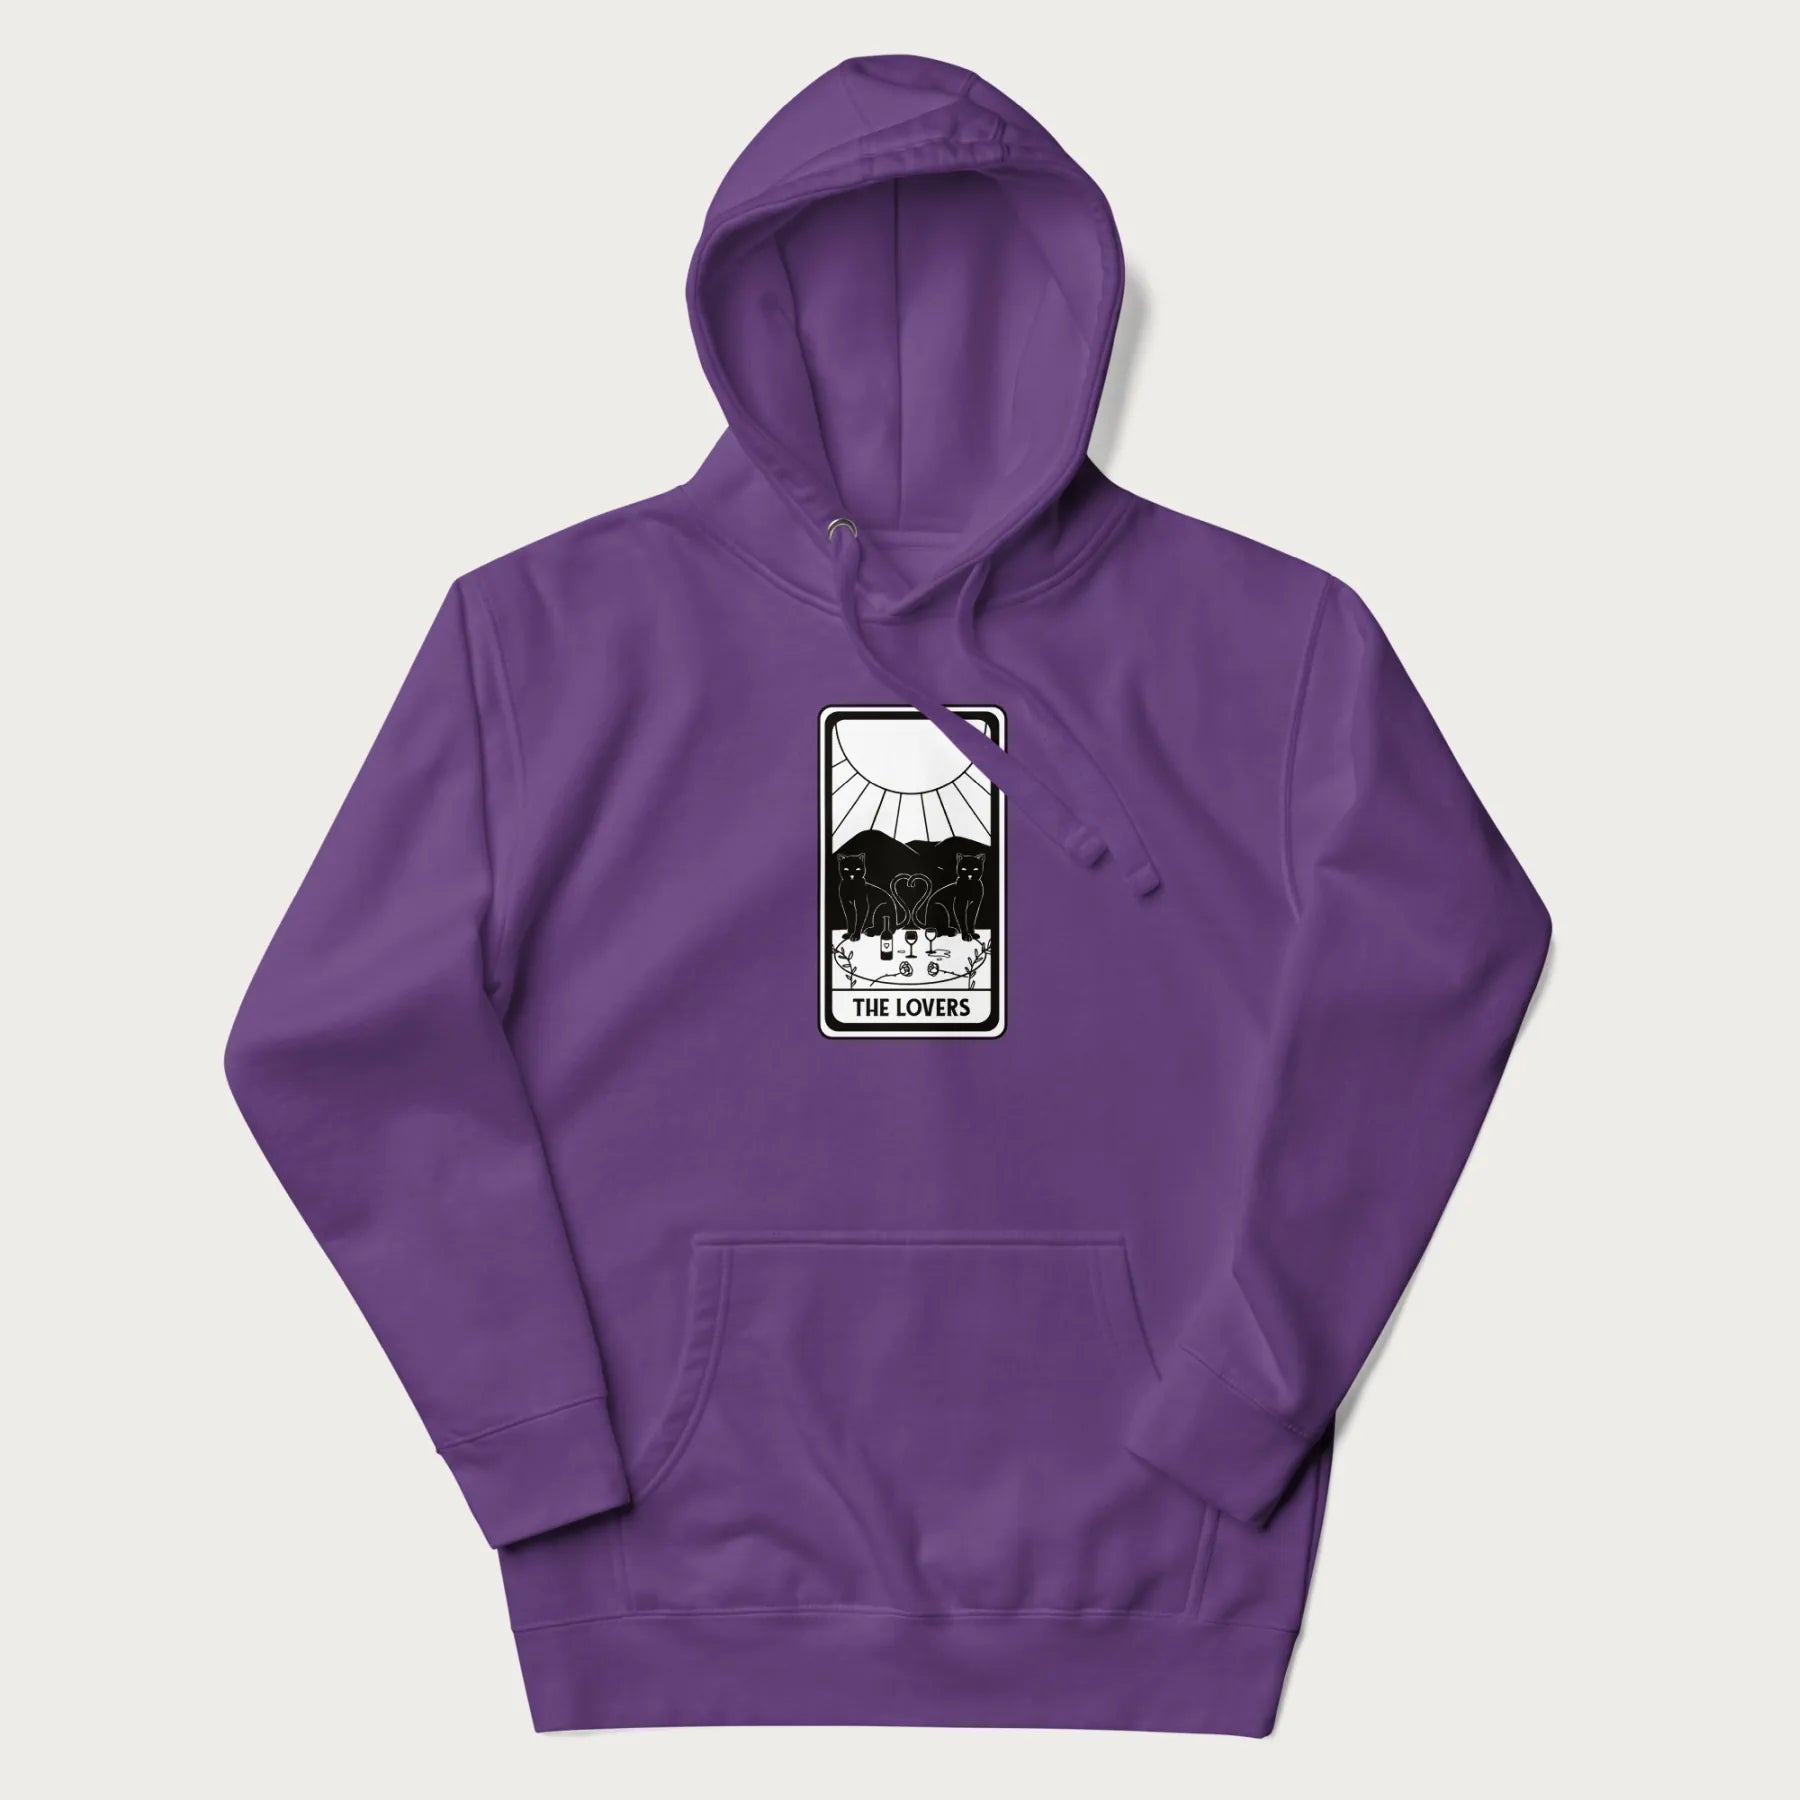 Purple hoodie with a 'The Lovers' tarot card graphic of two cats with intertwined tails forming a heart, wine, and roses.